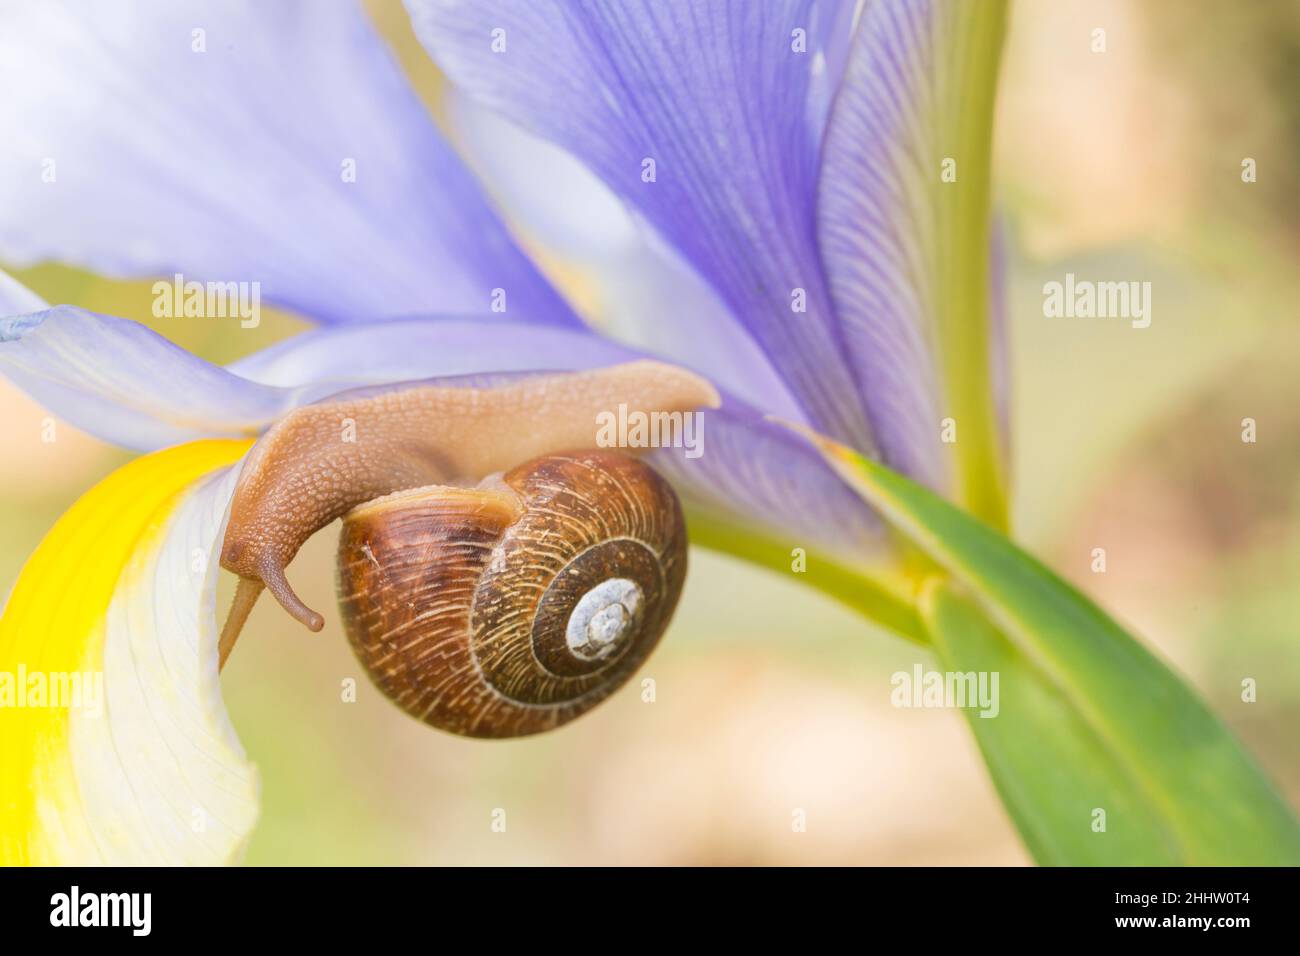 A garden snail turns upside down as it moves along the petal of a purple and yellow iris Stock Photo